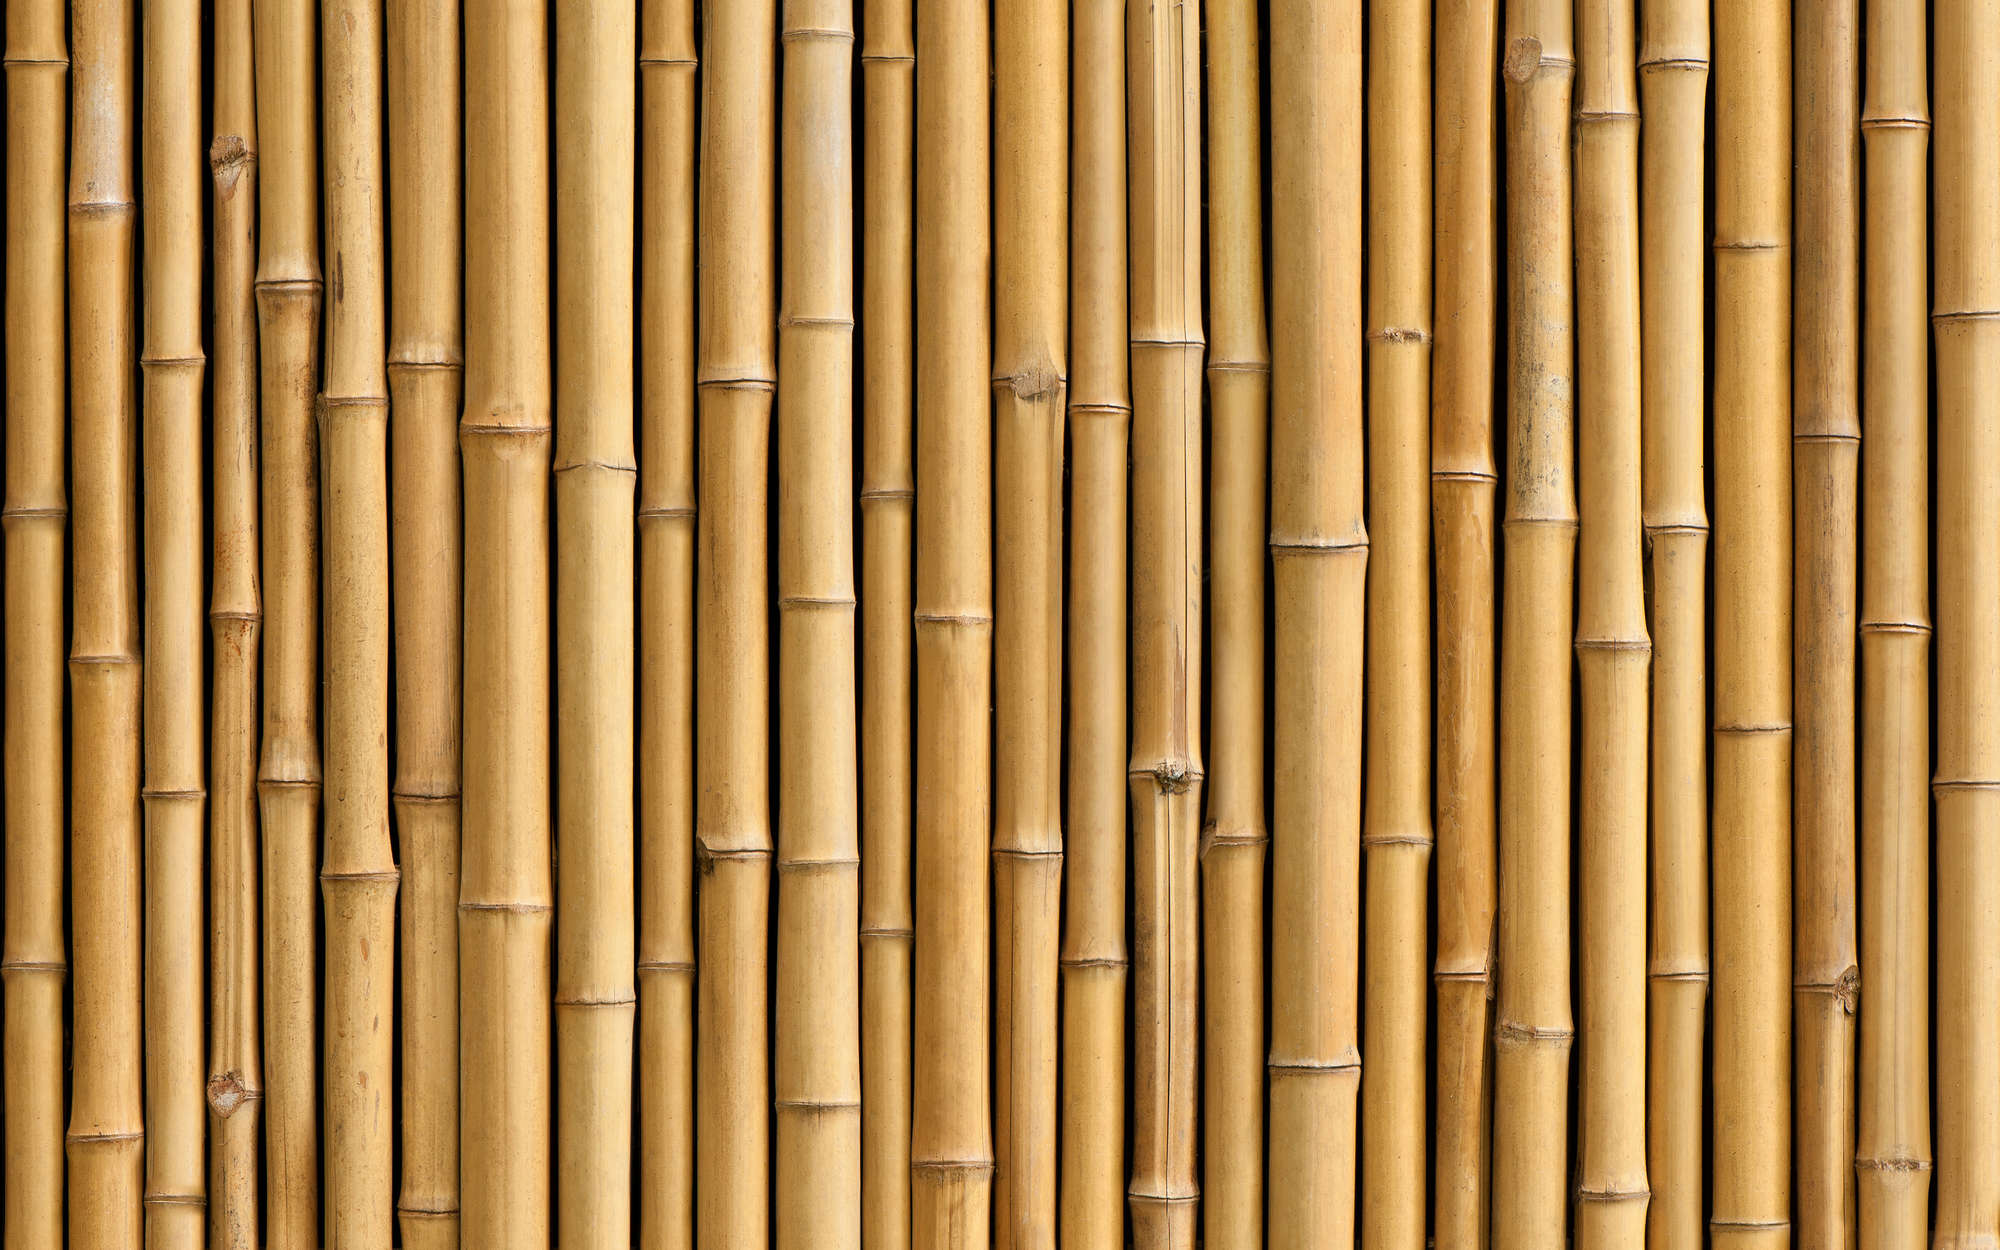             Bamboo Wall Mural in Beige - Textured Non-woven
        